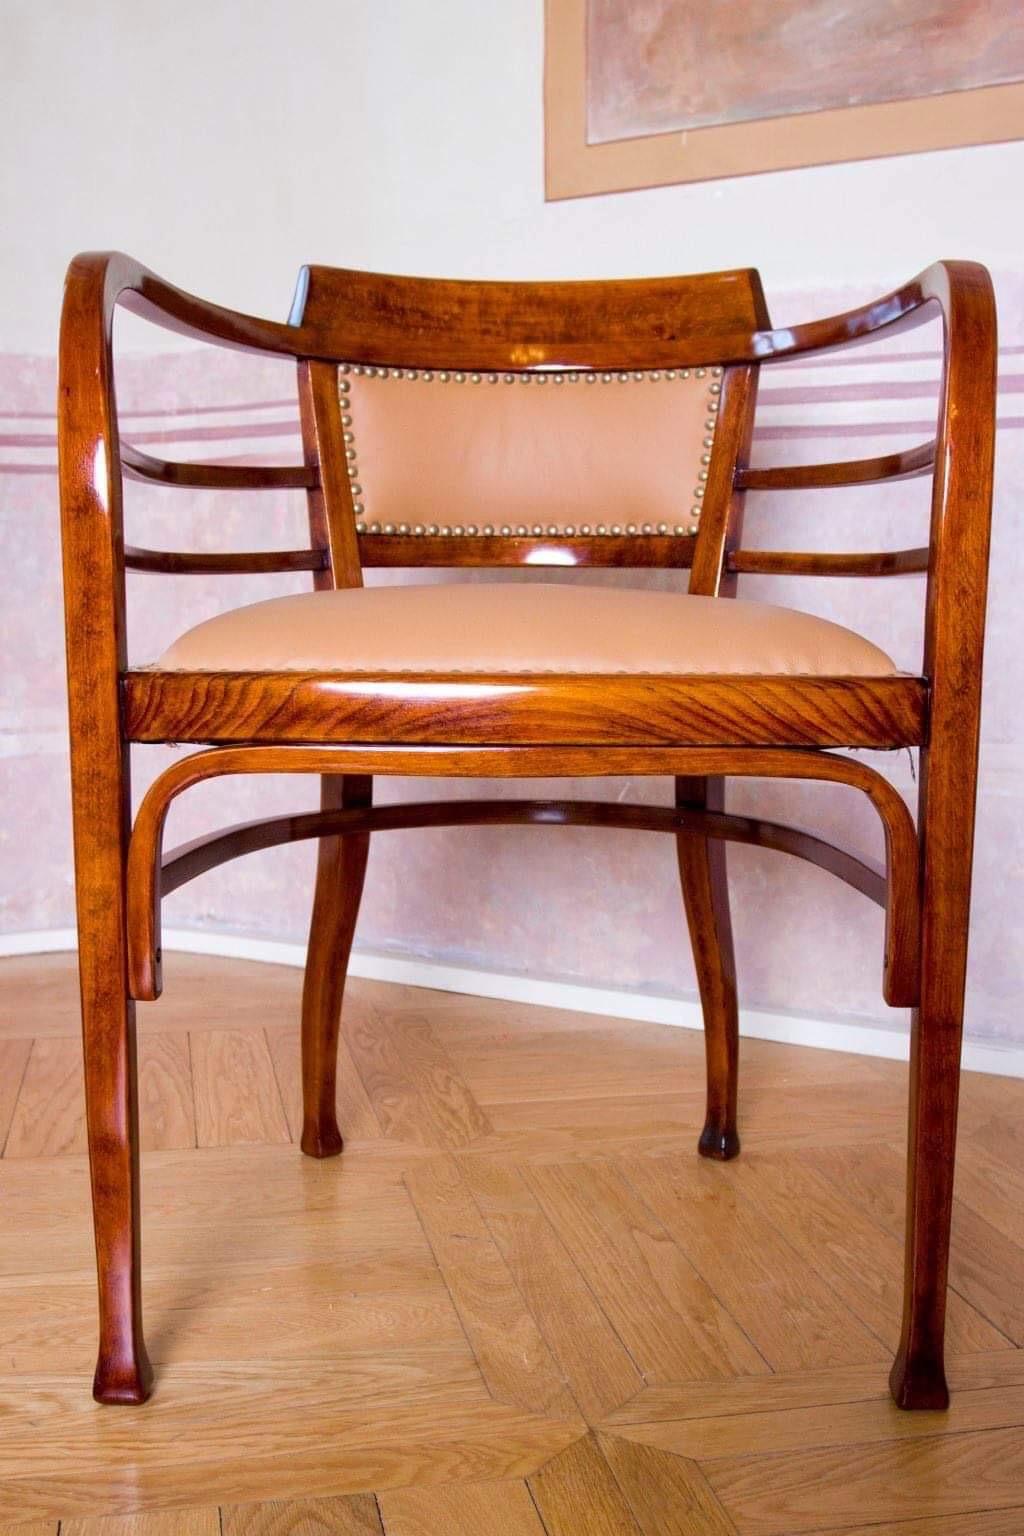 Early 20th Century Art Nouveau Thonet Chairs and Bench by Otto Wagner, Austria 1900’s, Set of 3 For Sale